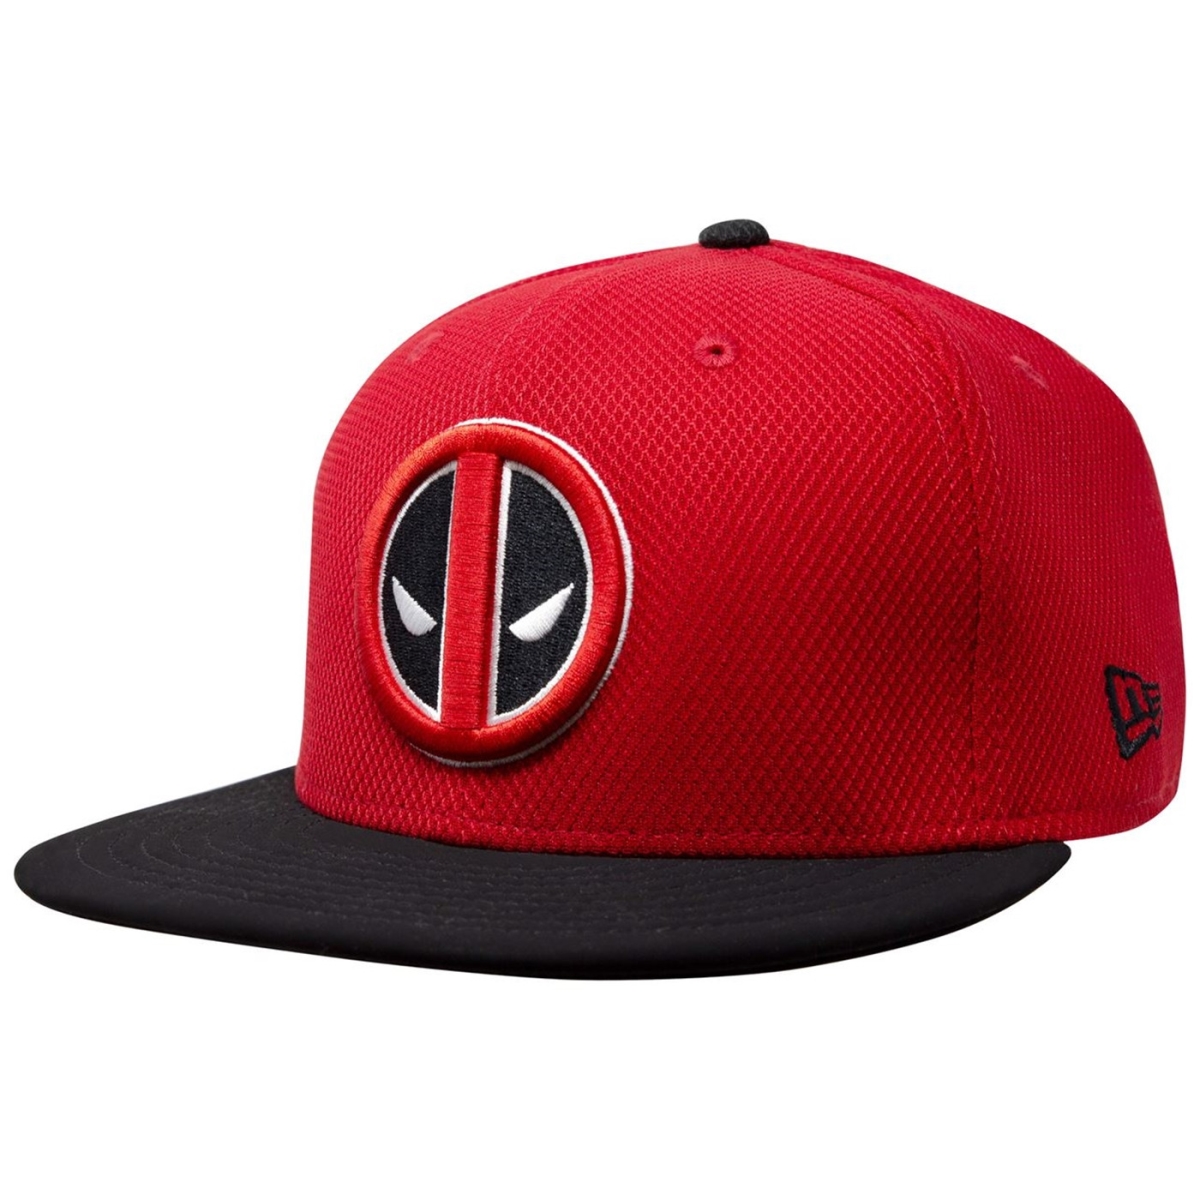 Picture of Deadpool hatdpsymrb5950-712-7 1-2 Fitted Deadpool Symbol Red & Black 59Fifty Fitted Hat - Size 7.5